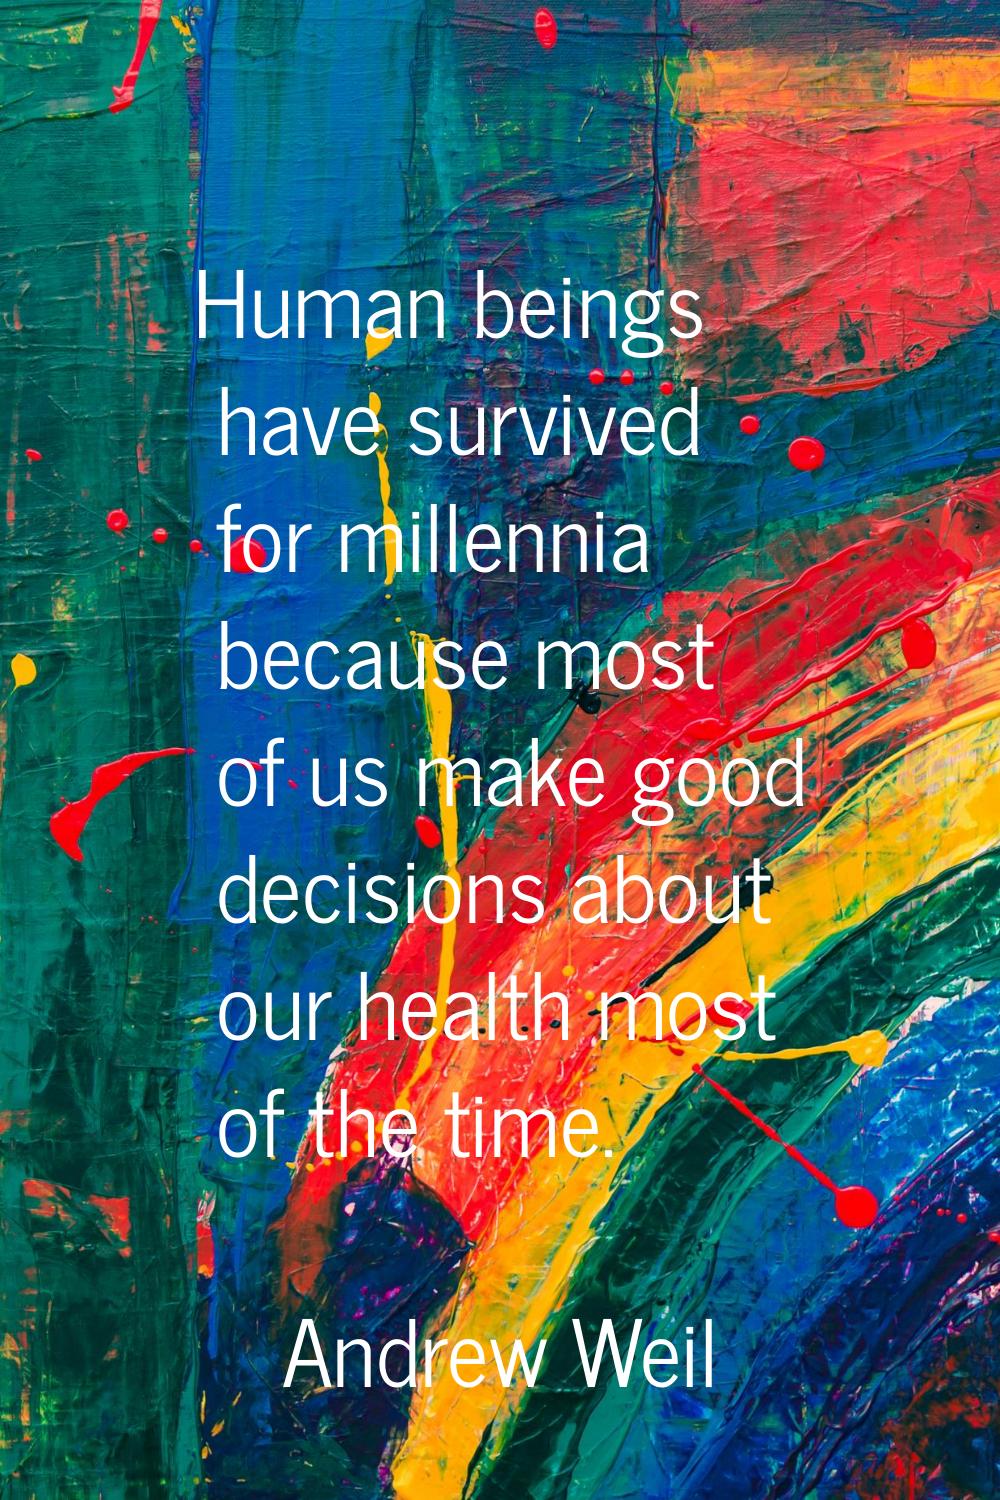 Human beings have survived for millennia because most of us make good decisions about our health mo